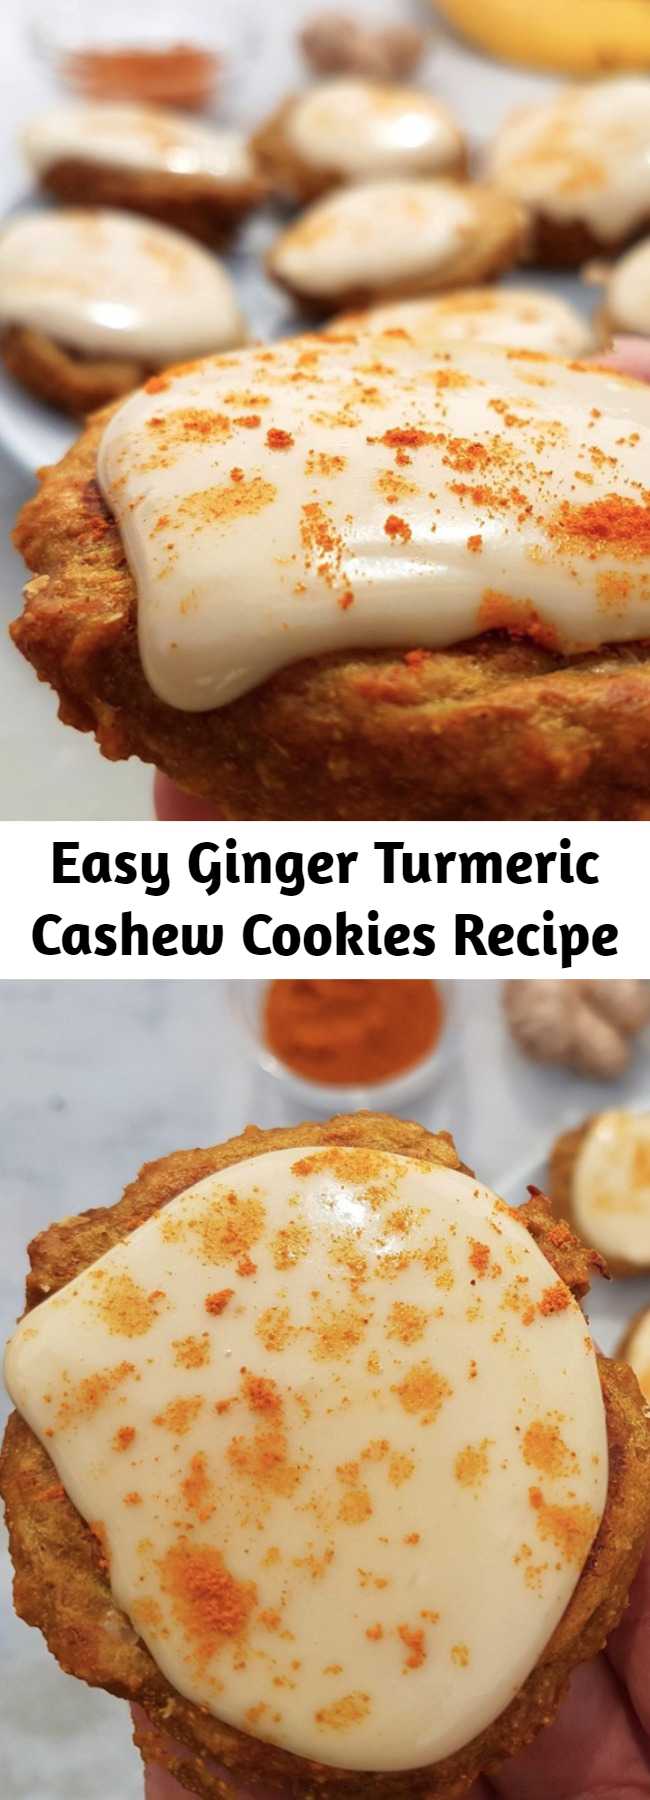 Easy Ginger Turmeric Cashew Cookies Recipe - Quick and easy healthy cookies recipe. These golden cookies are ginger and turmeric flavour with a creamy cashew frosting. Vegan and gluten free when made with gluten-free oats. #vegan #veganrecipe #healthy #cookies #healthycookies